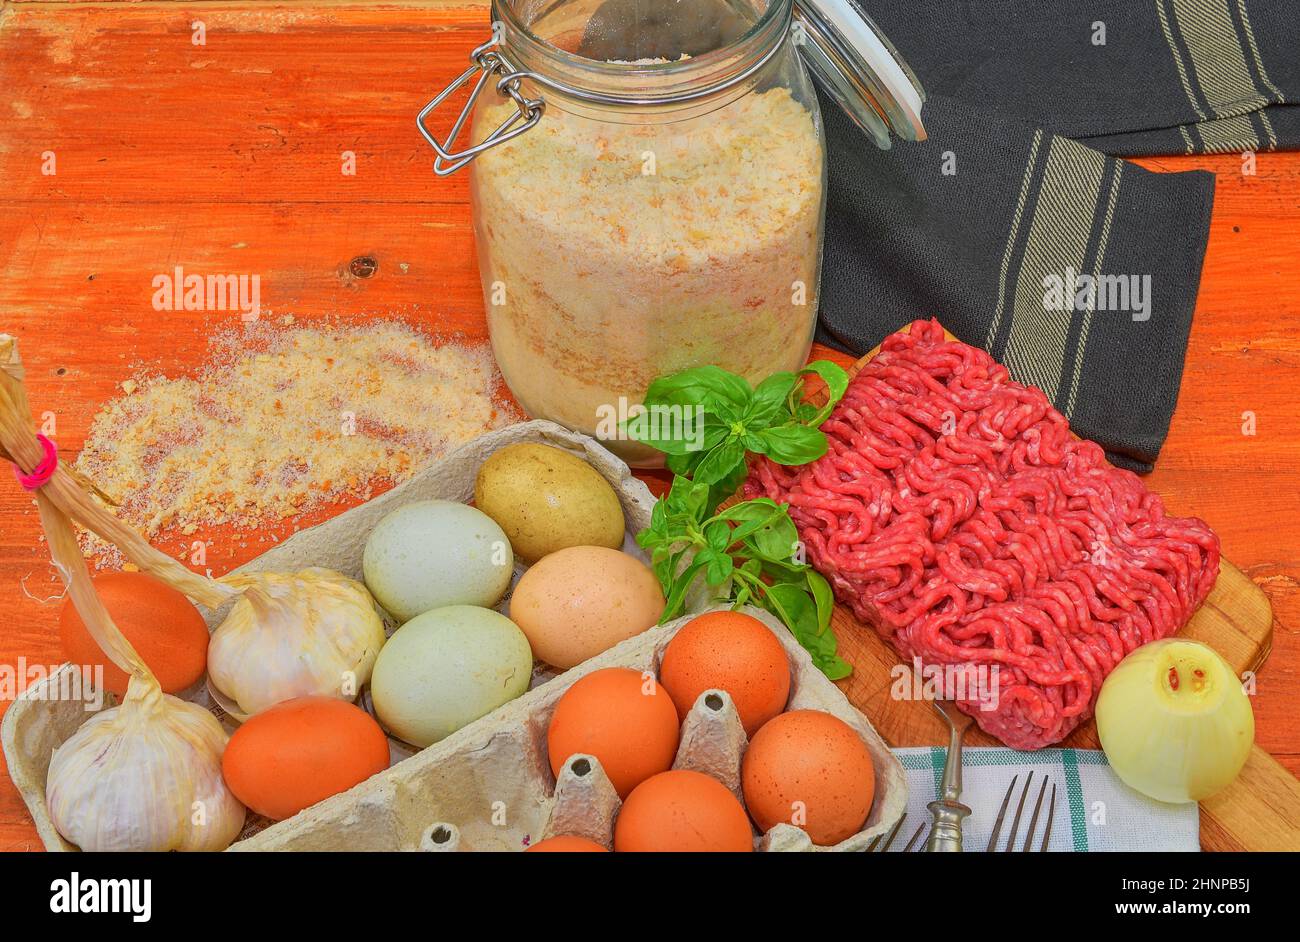 Mince. Ground meat with ingredients for cooking. Mixed minced meat ready to making burgers, fatty's, meaetballs. Food photography. Culinary concept. Minced meat recipe Stock Photo